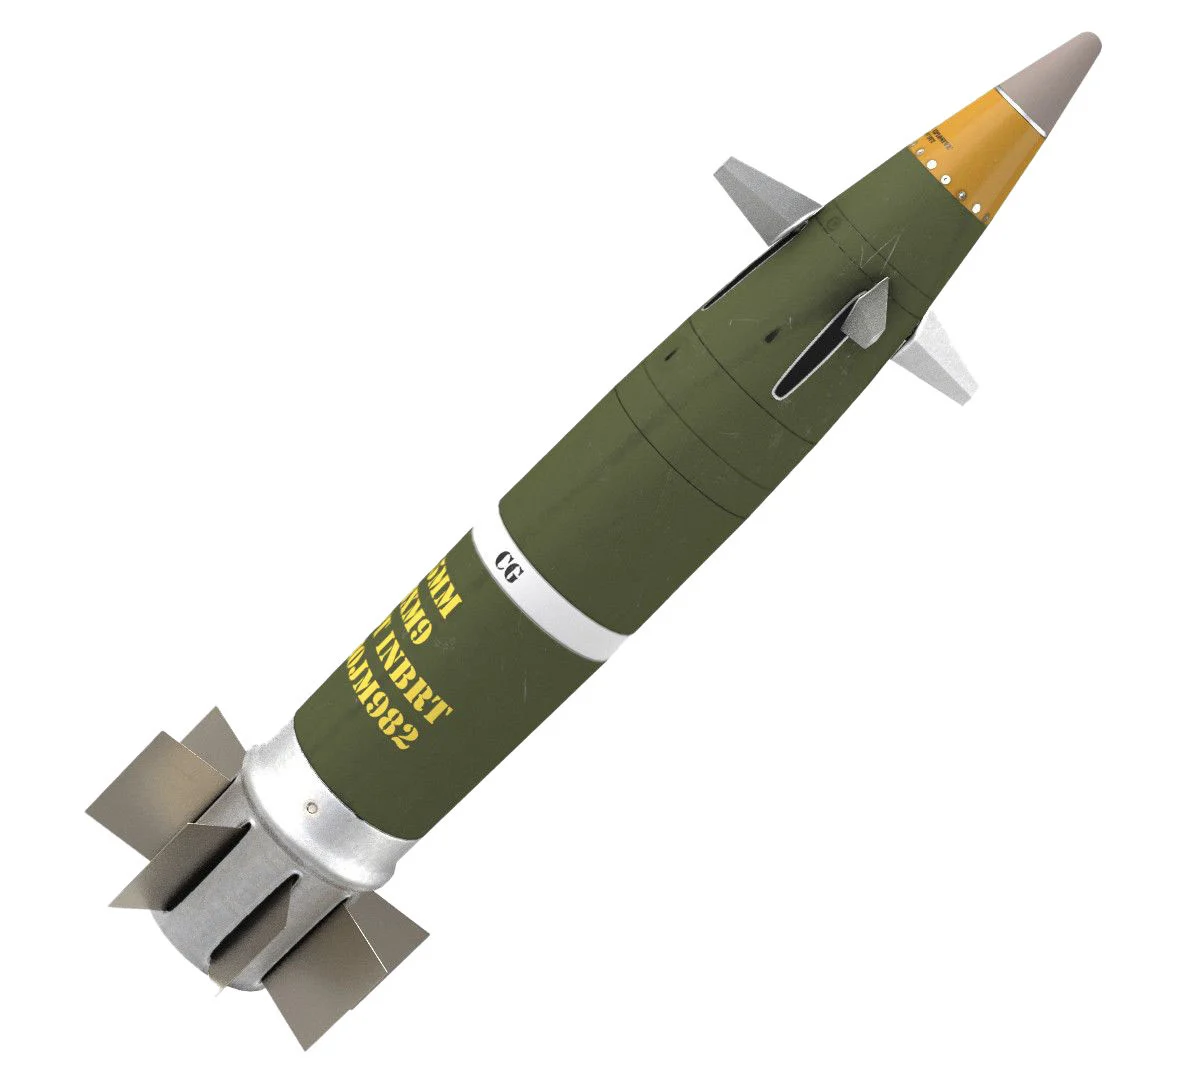 Precision-guided 155mm artillery rounds